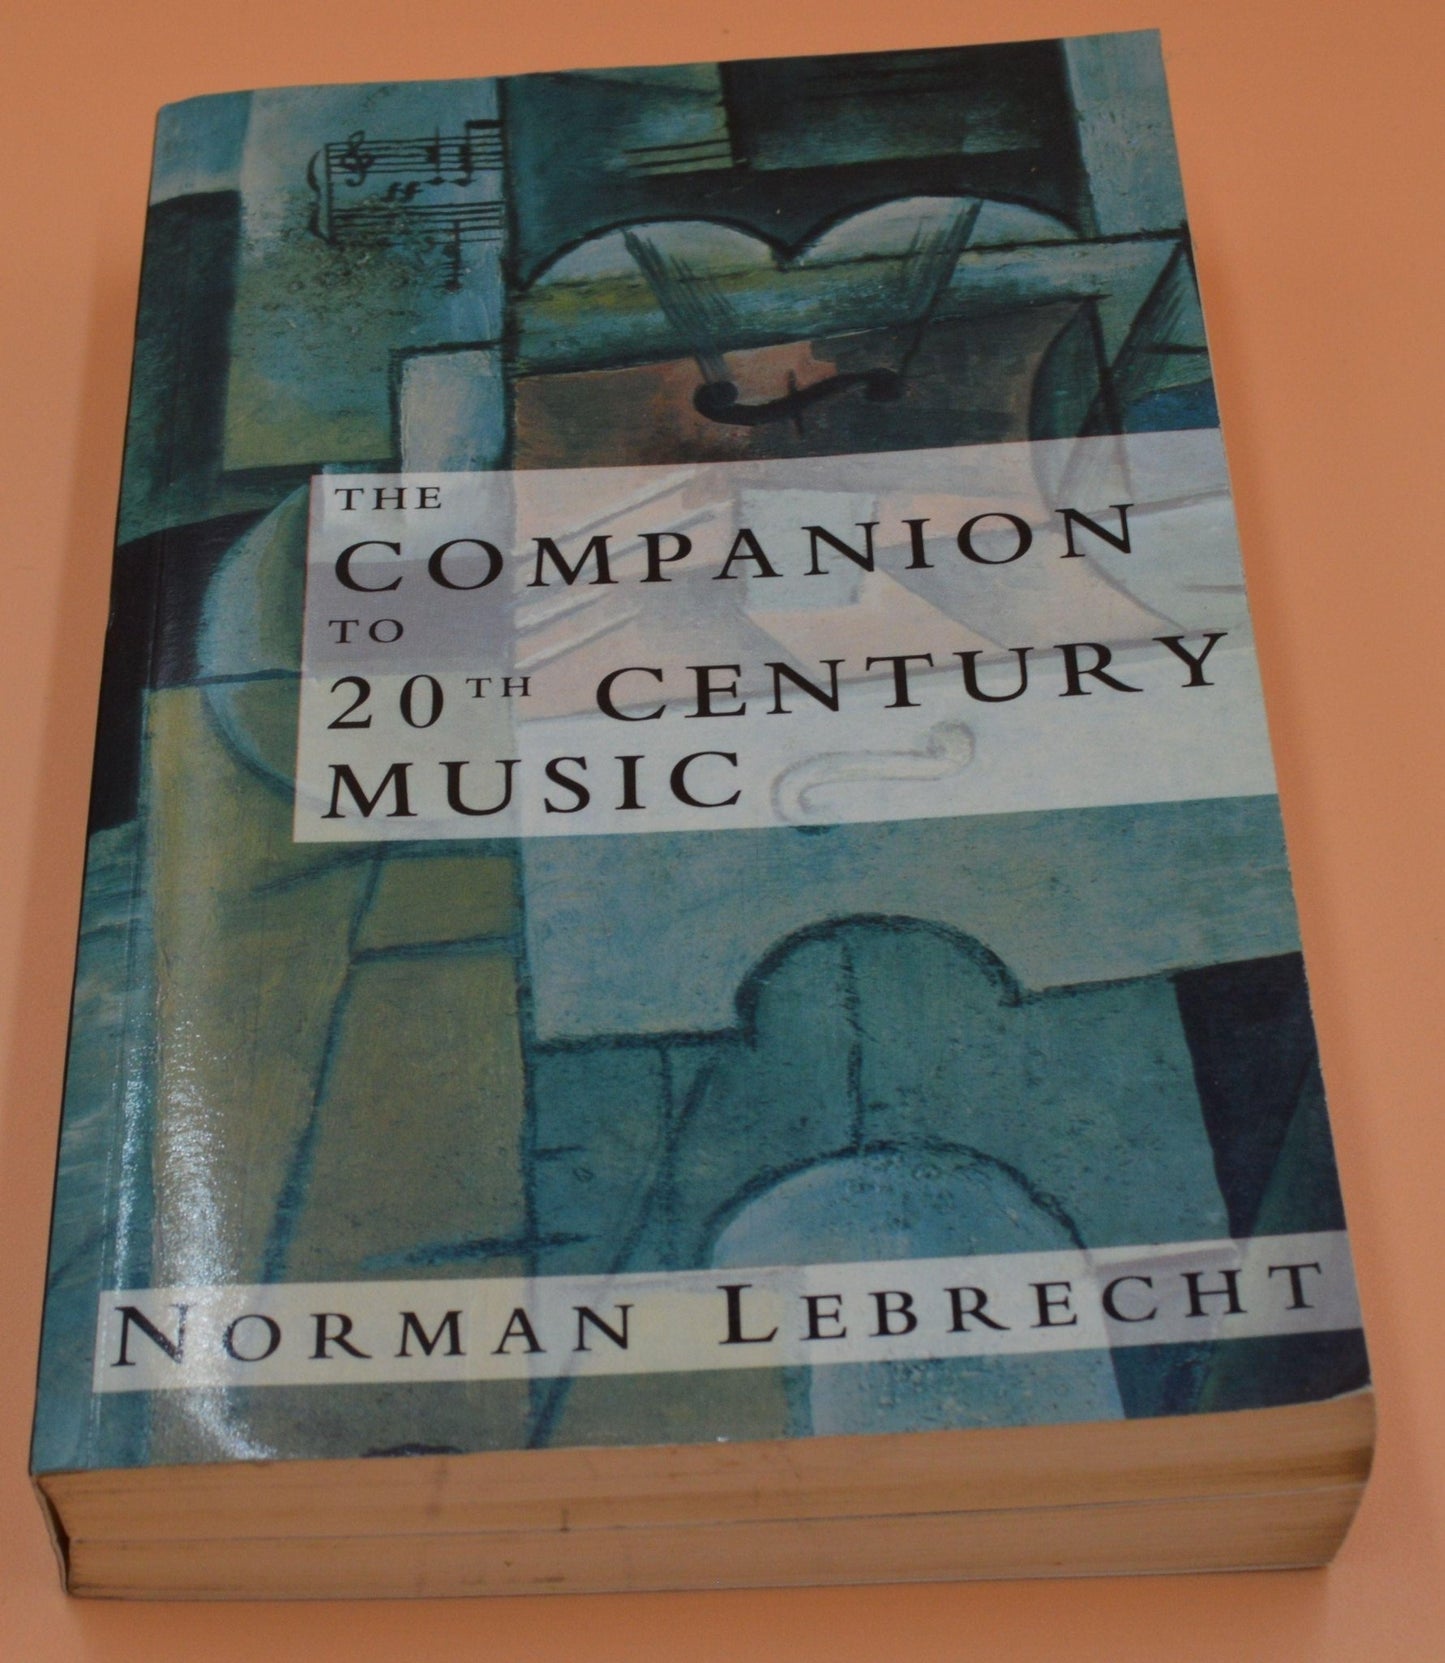 SECONDHAND BOOK THE COMPANION TO 20TH CENTURY MUSIC by NORMAN LEBRECHT - TMD167207